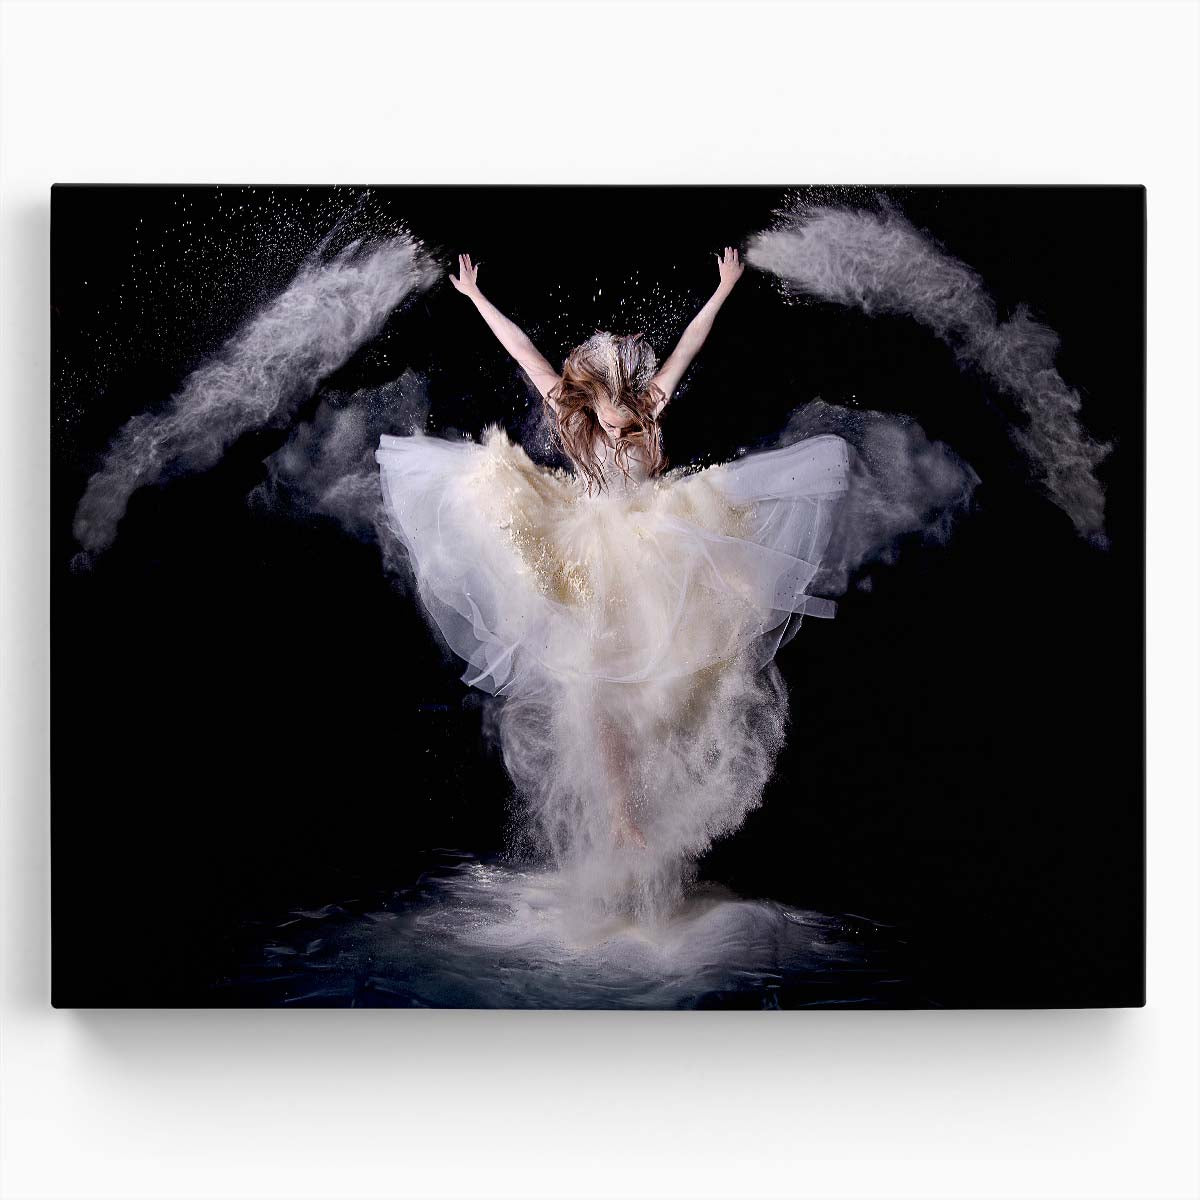 Dramatic Angelic Leap in Powder Wall Art by Luxuriance Designs. Made in USA.